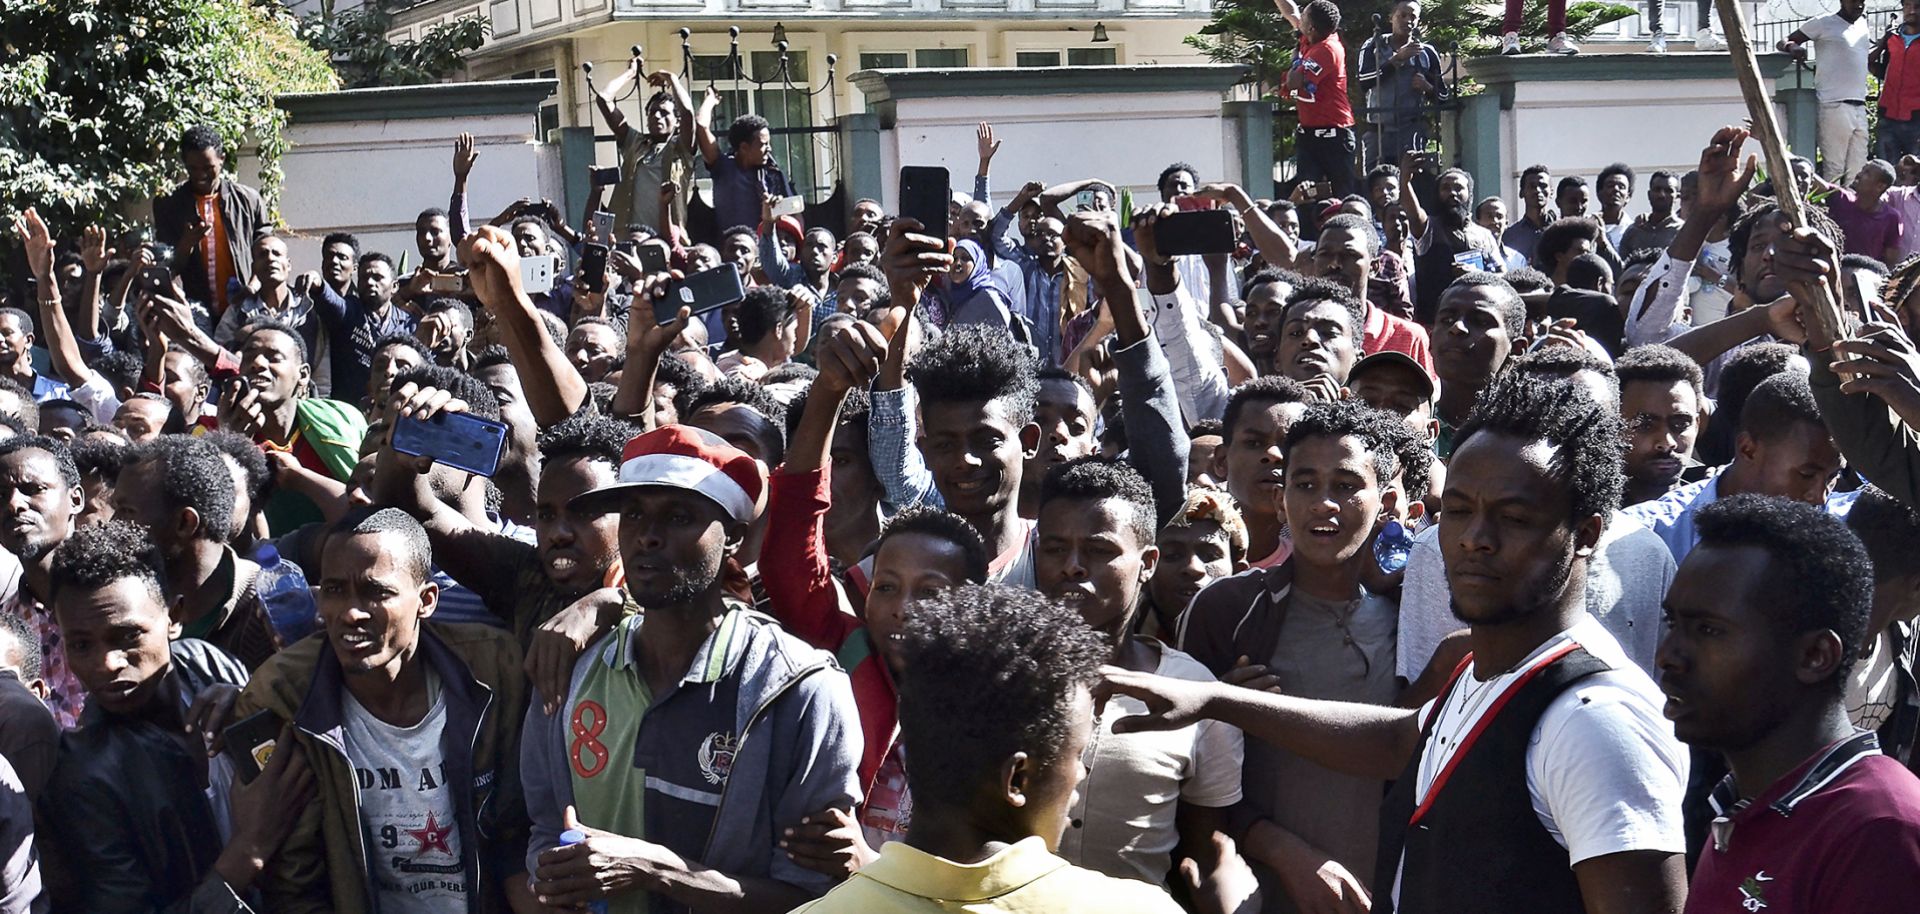 Supporters of Jawar Mohammed, a member of the Oromo ethnic group and high-profile opposition activist, gather outside Ethiopian Prime Minister Abiy Ahmed's home following rumors that his security forces had tried to orchestrate an attack against Mohammed. 